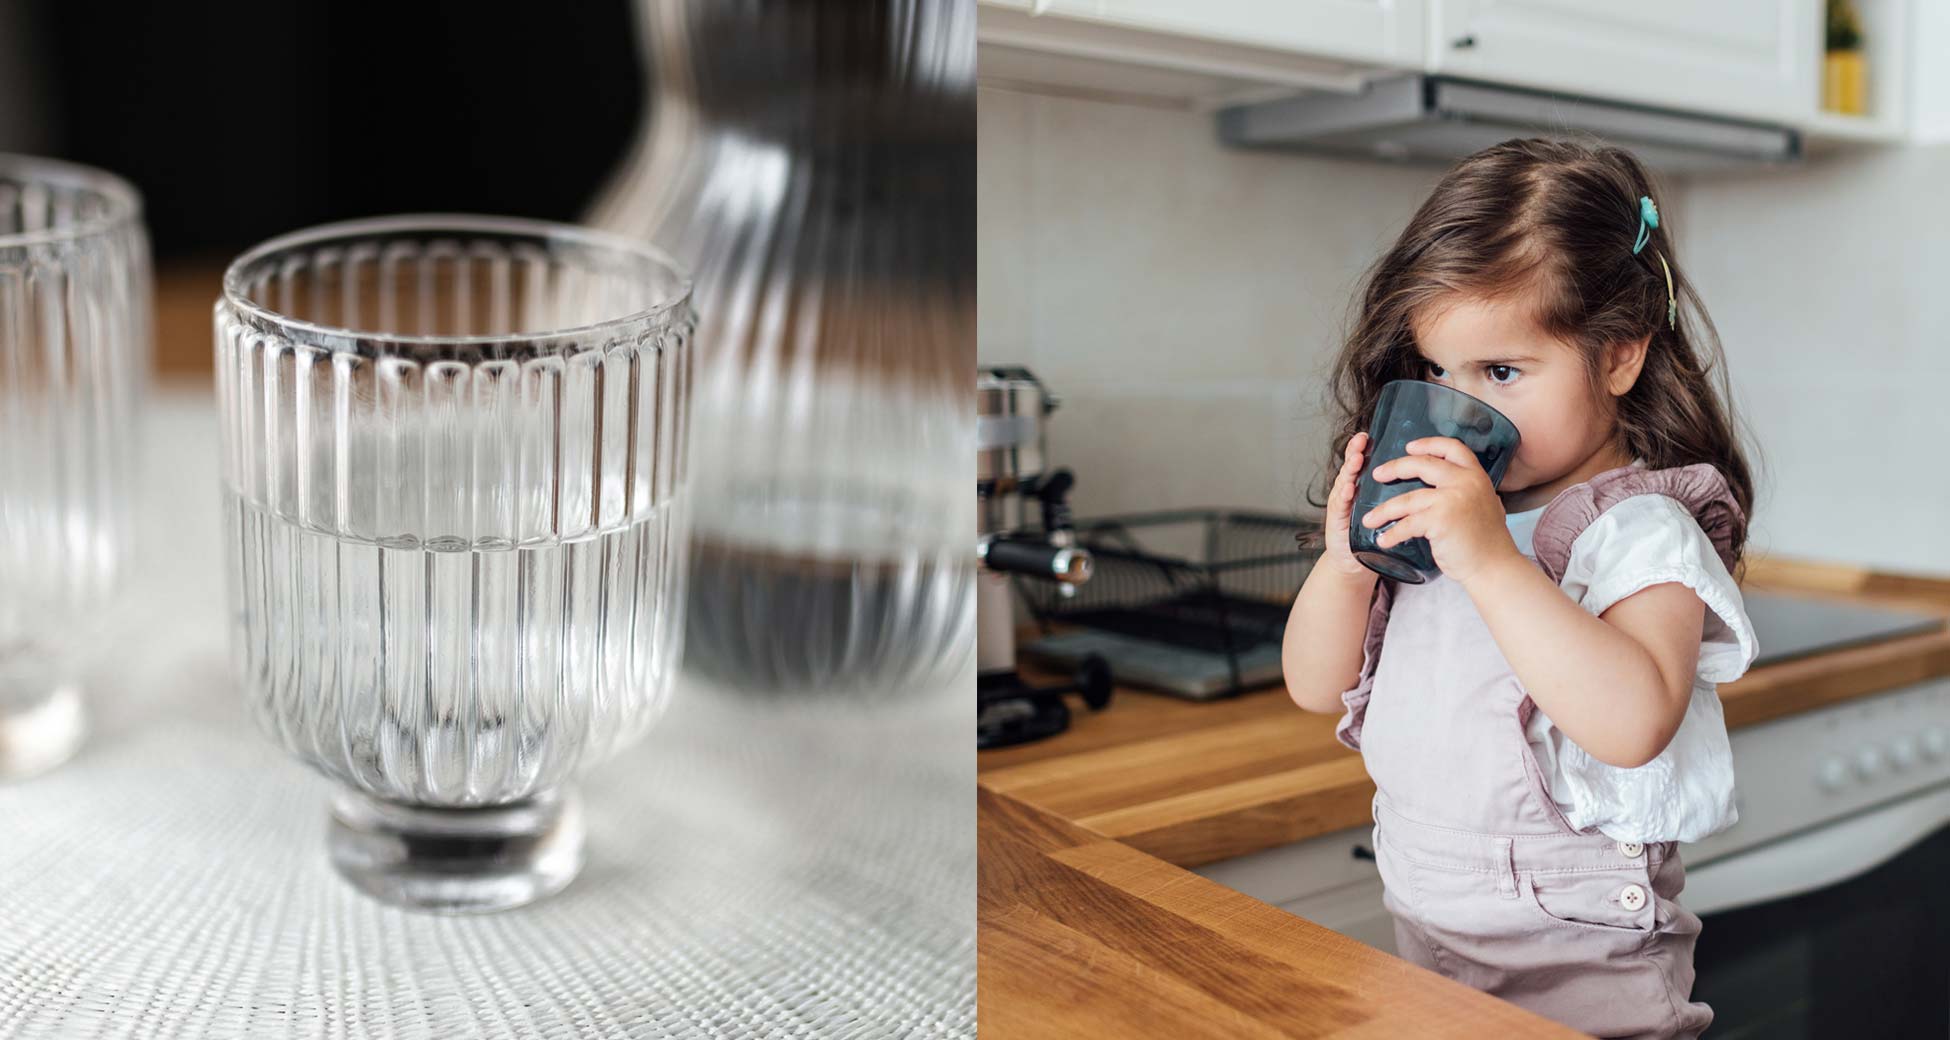 Composite photograph of a glass of water and a young girl drinking water